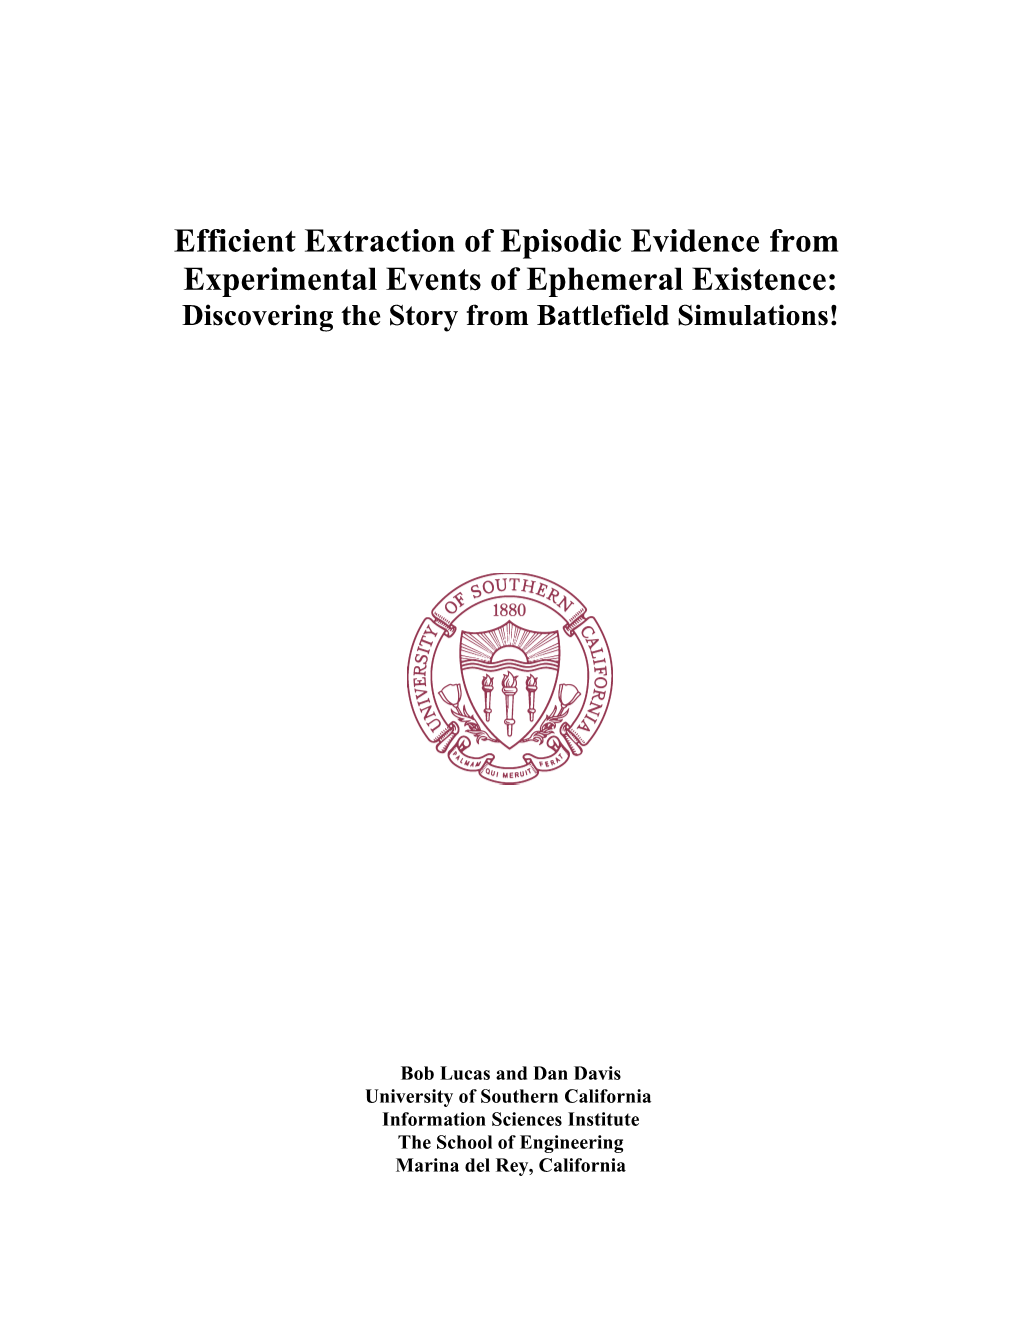 Efficient Extraction of Episodic Evidence From